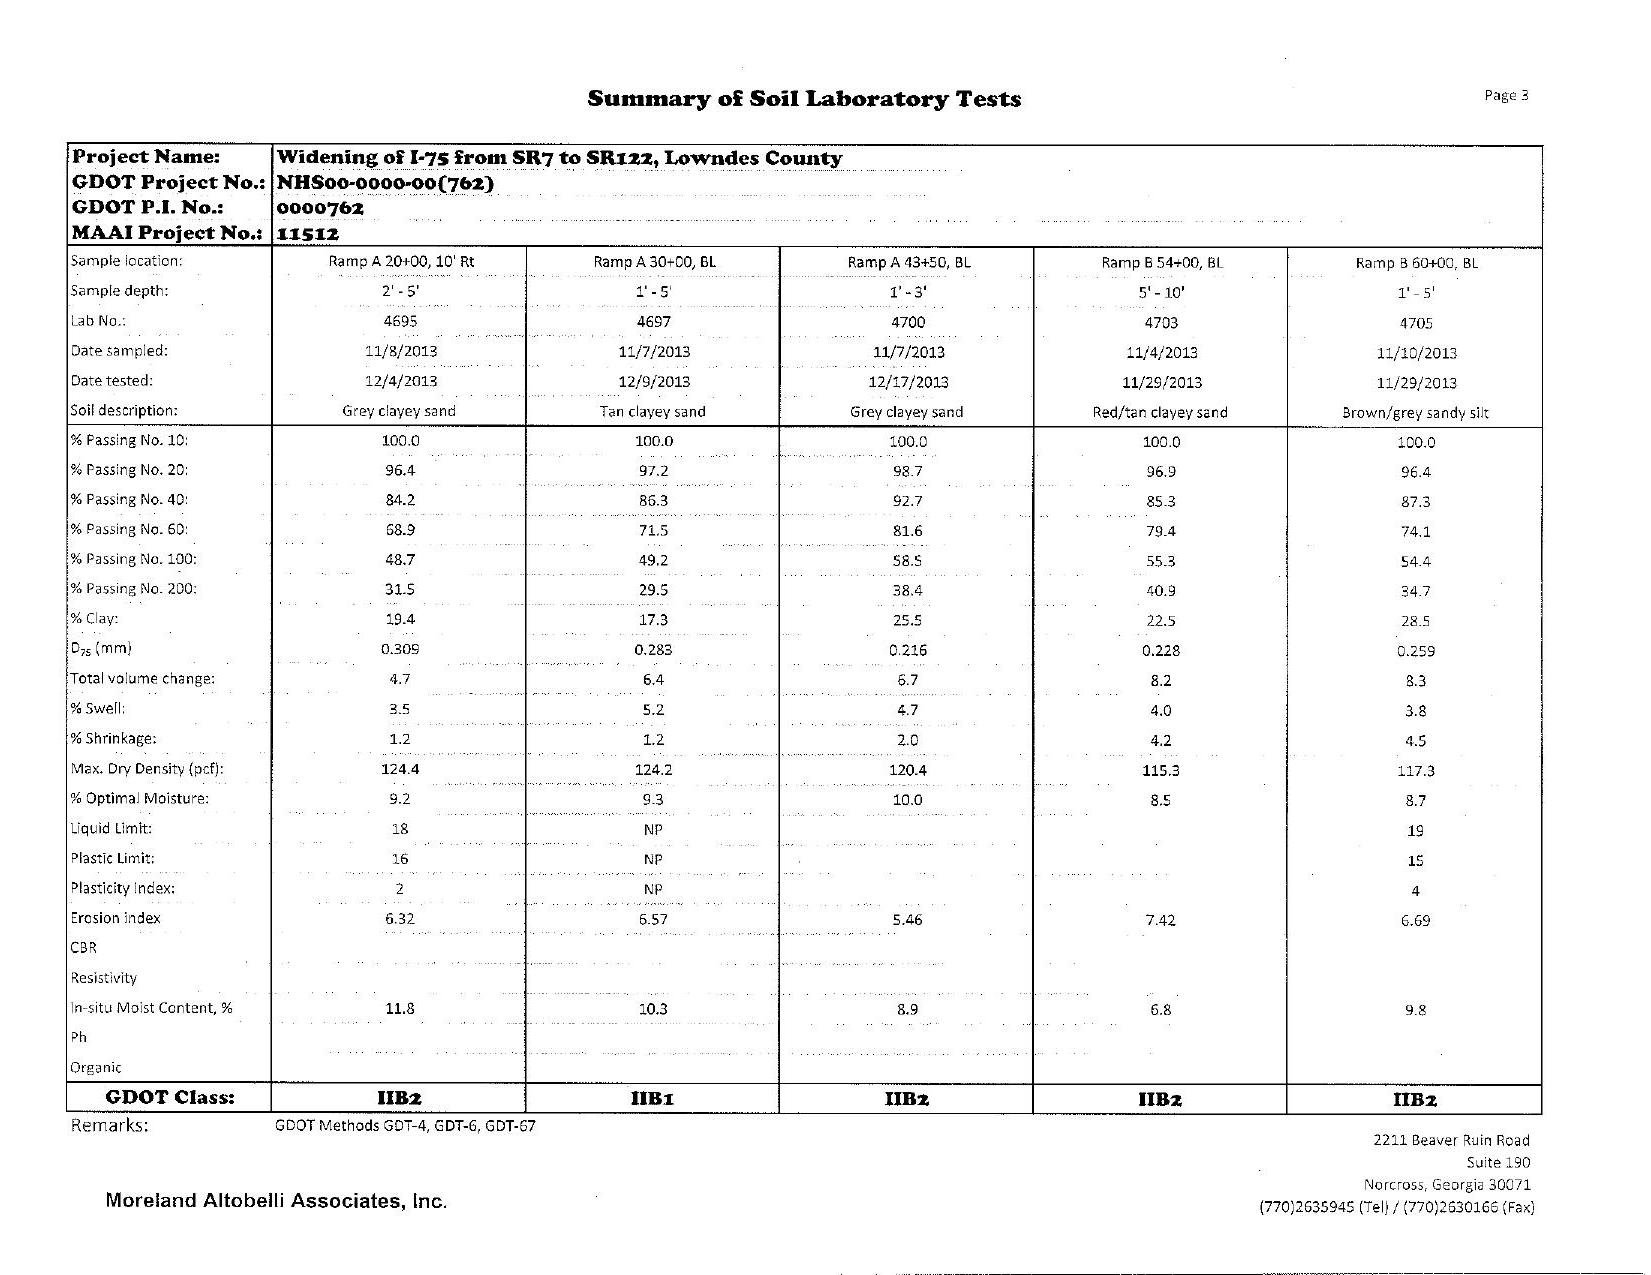 Summary of Soil Laboratory Tests (3 of 9)